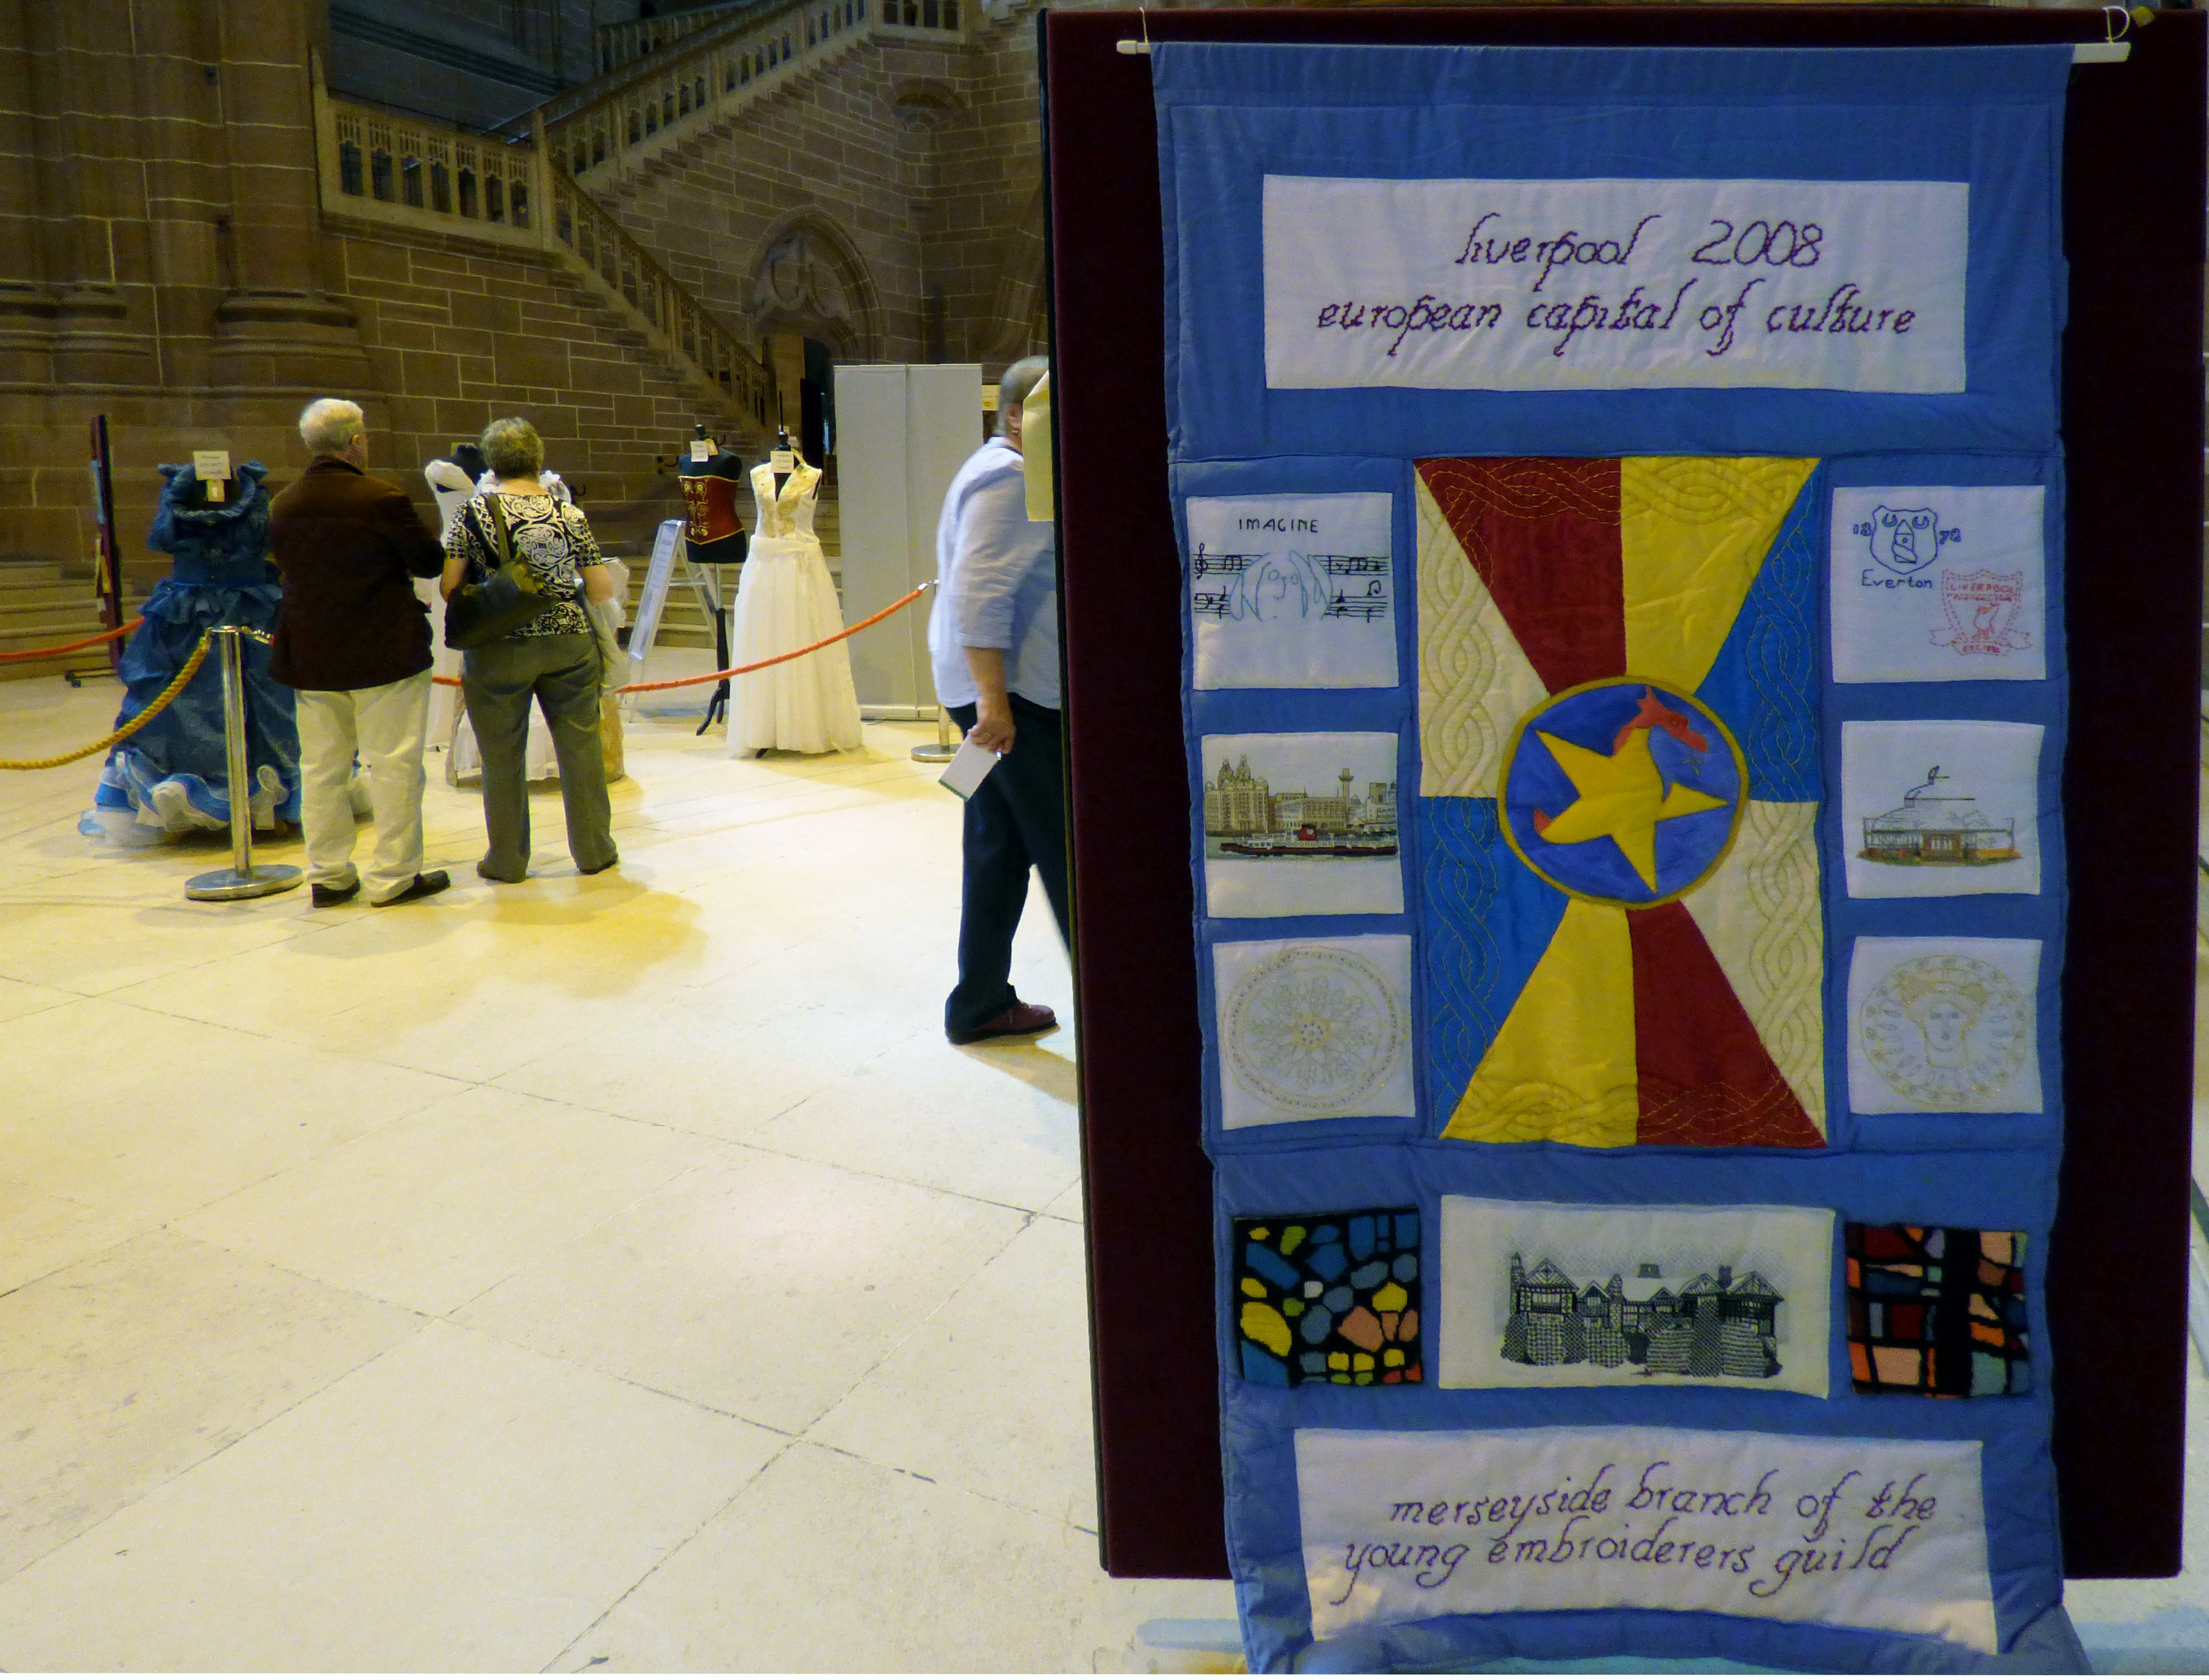 Merseyside Young Embroiderers 2008 banner at 60 Glorious Years exhibition, Liverpool Anglican Cathedral 2016